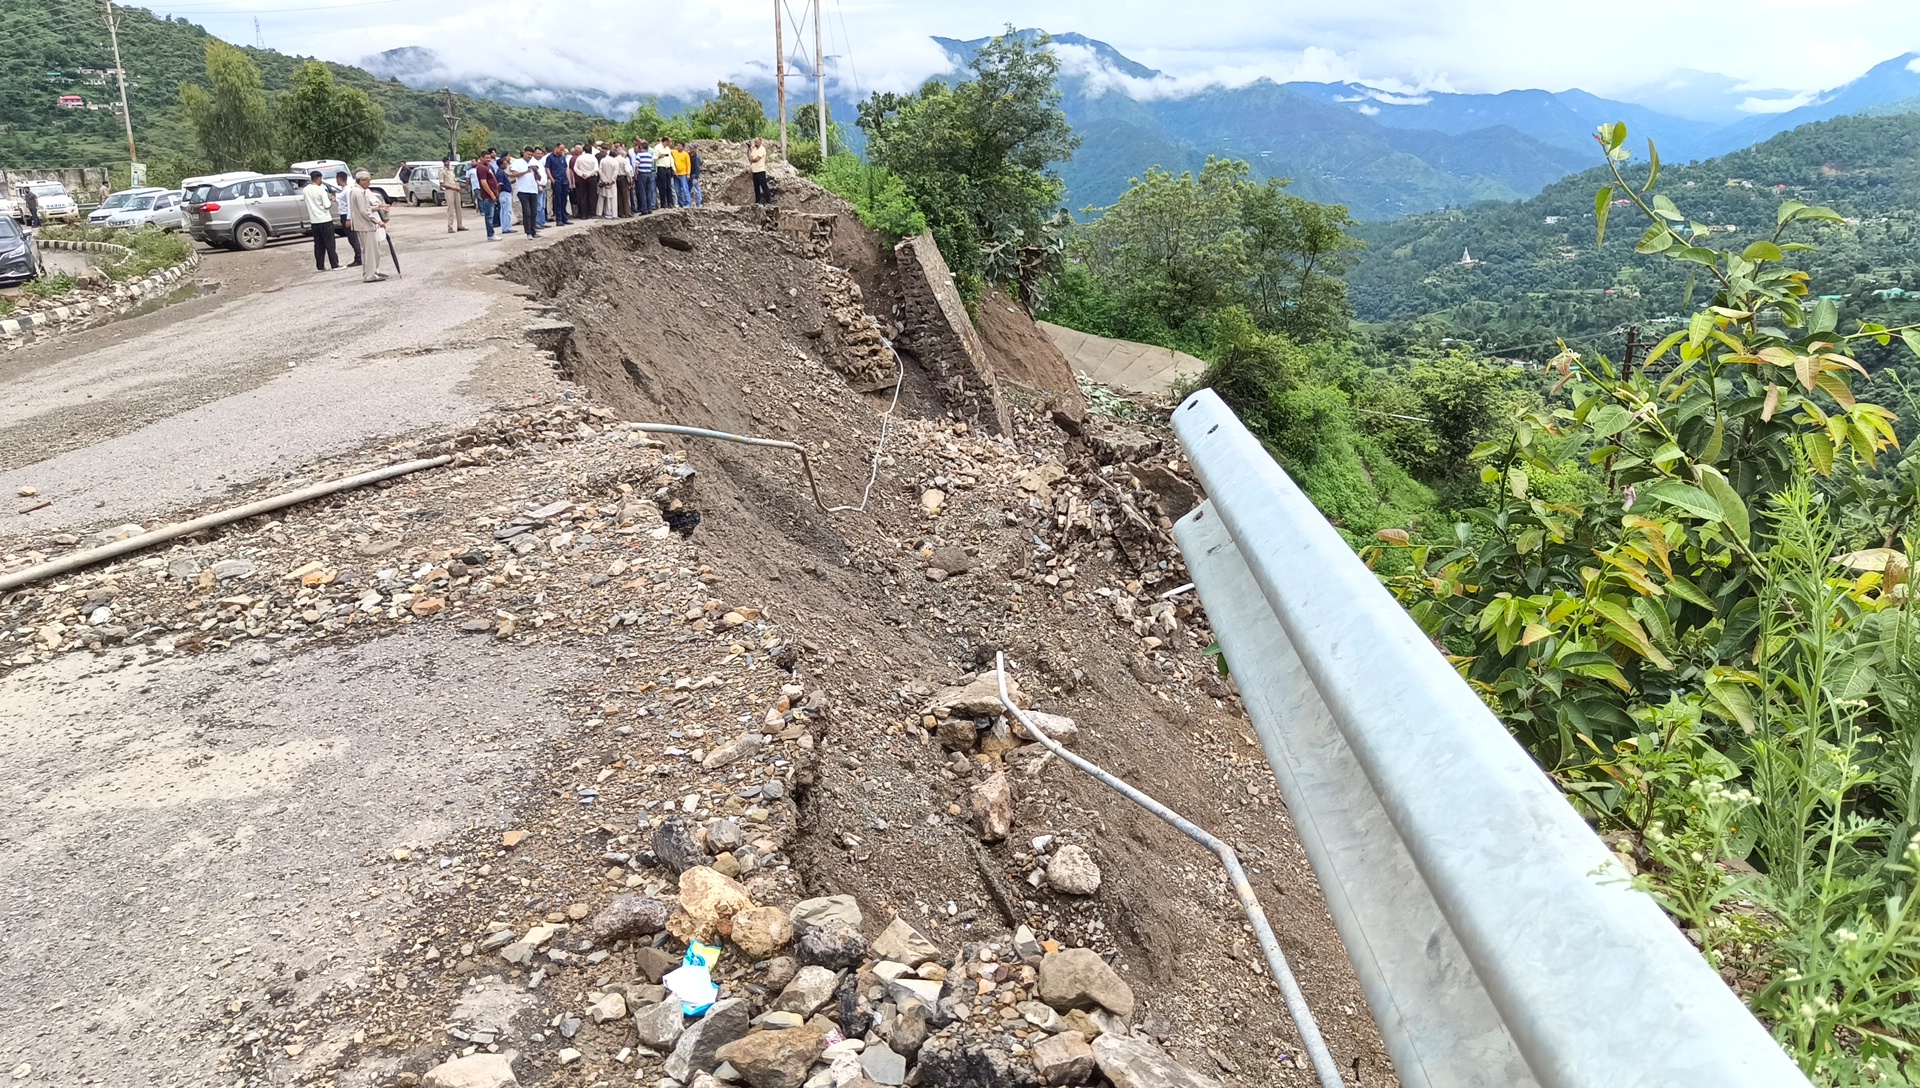 Monsoon Damage due to heavy rain in Himachal.